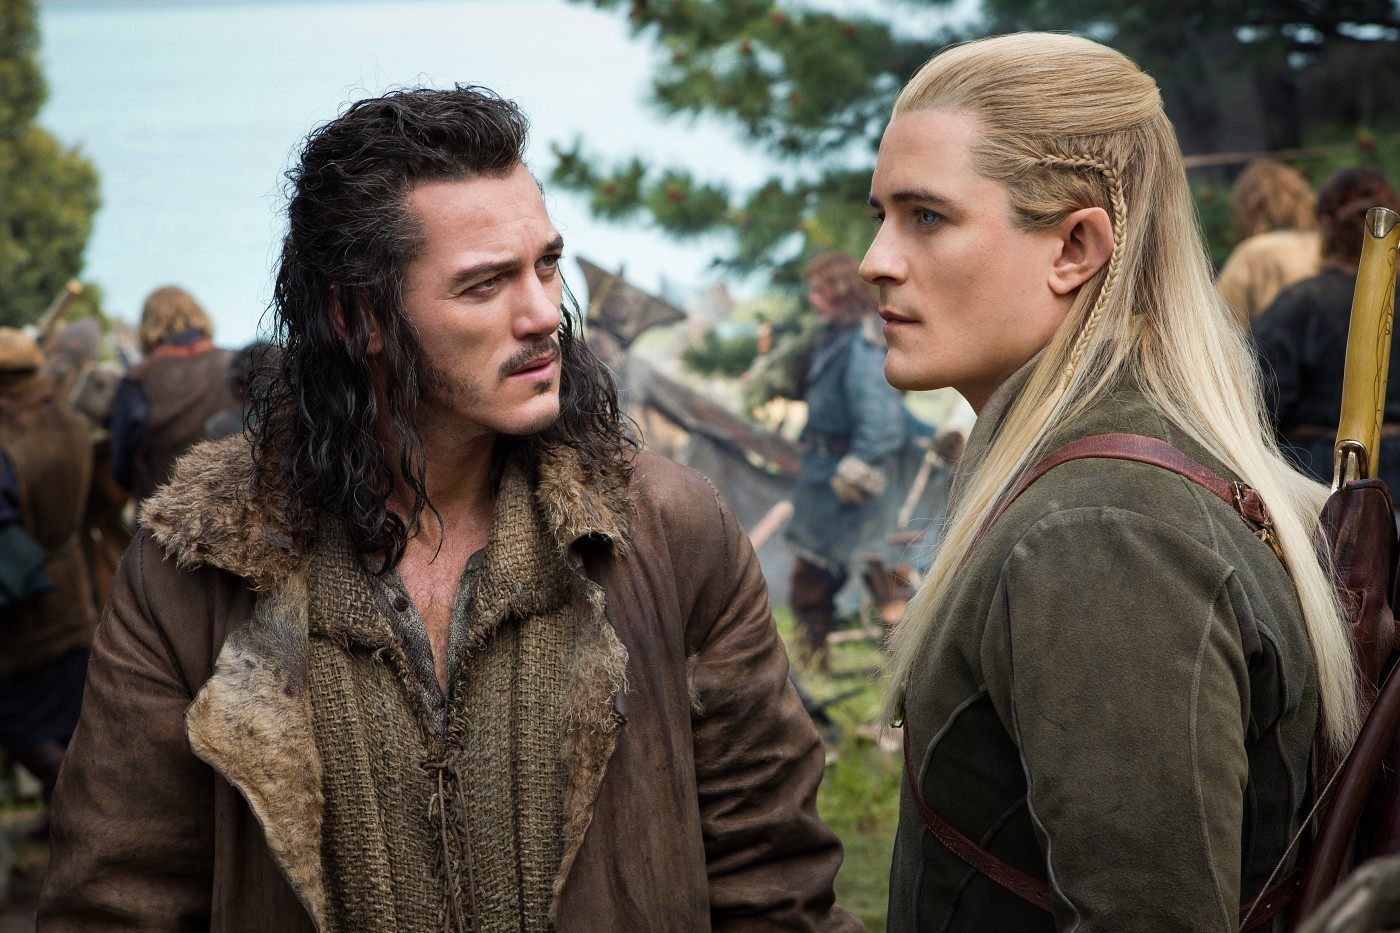 Luke Evans stars as Bard and Orlando Bloom stars as Legolas in Warner Bros. Pictures' The Hobbit: The Battle of the Five Armies (2014)